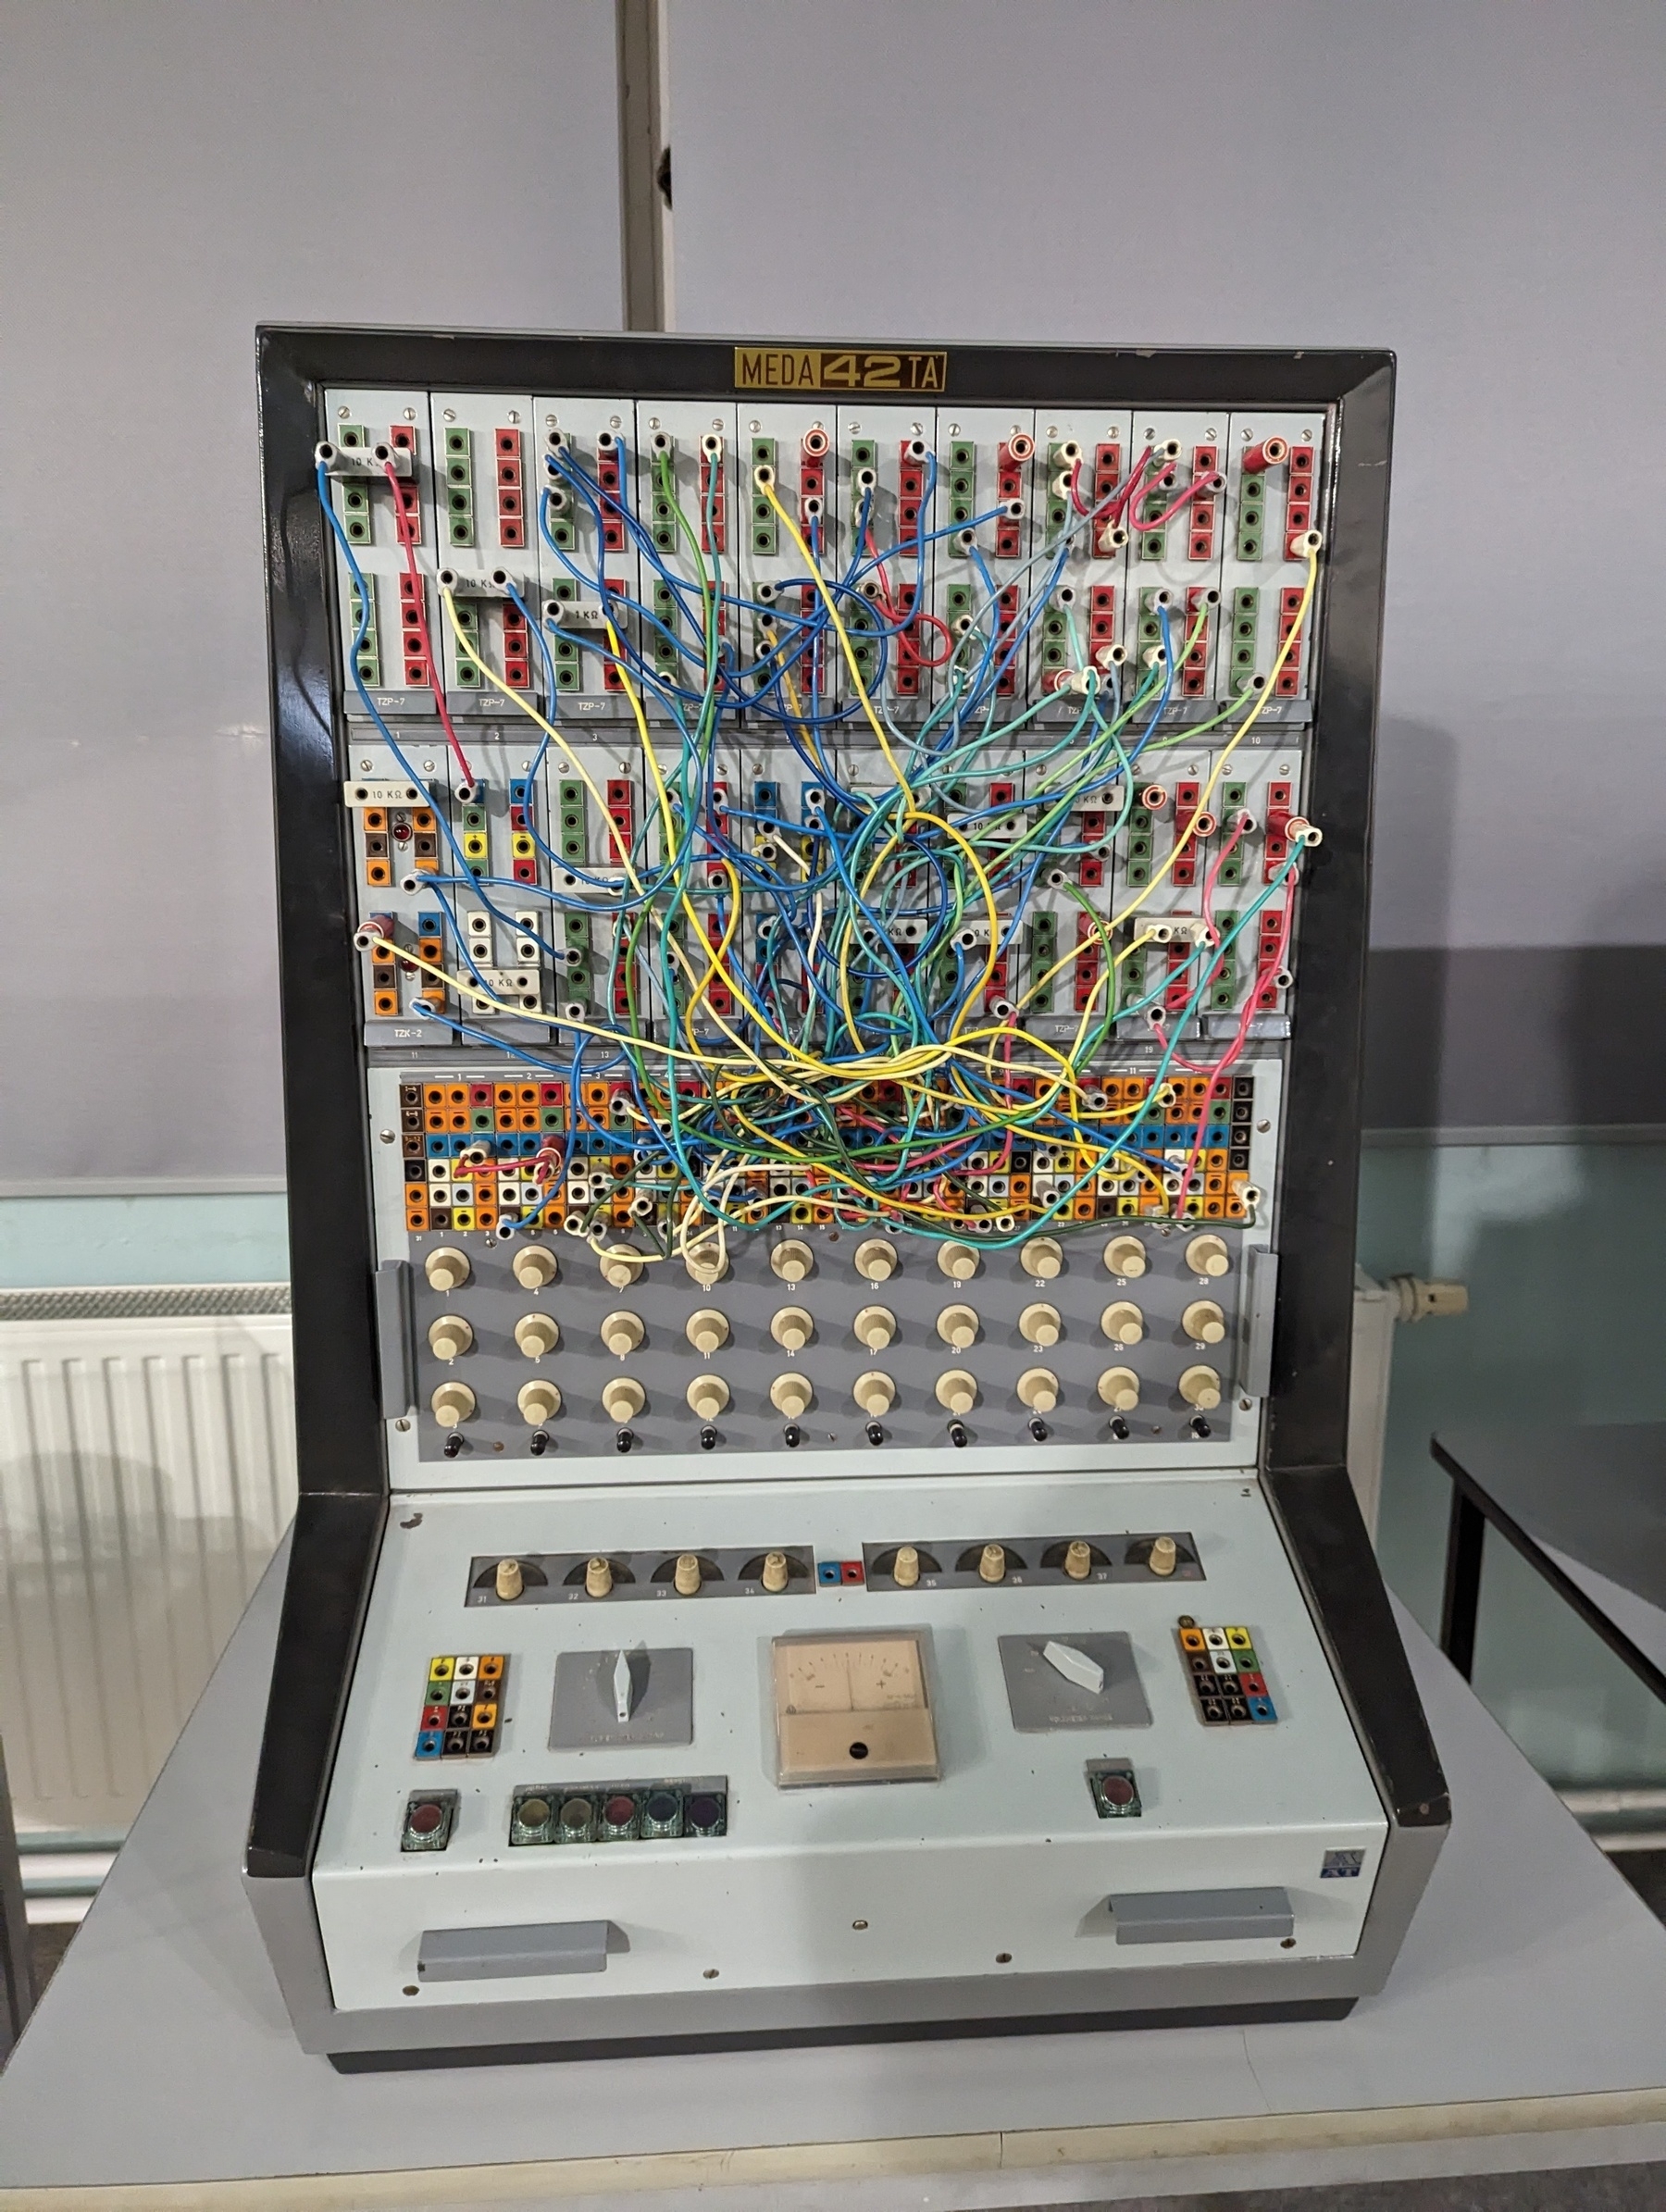 An old computer that looks like a big switch, lots of cables that were manually managed and were the computing act. A few buttons below 